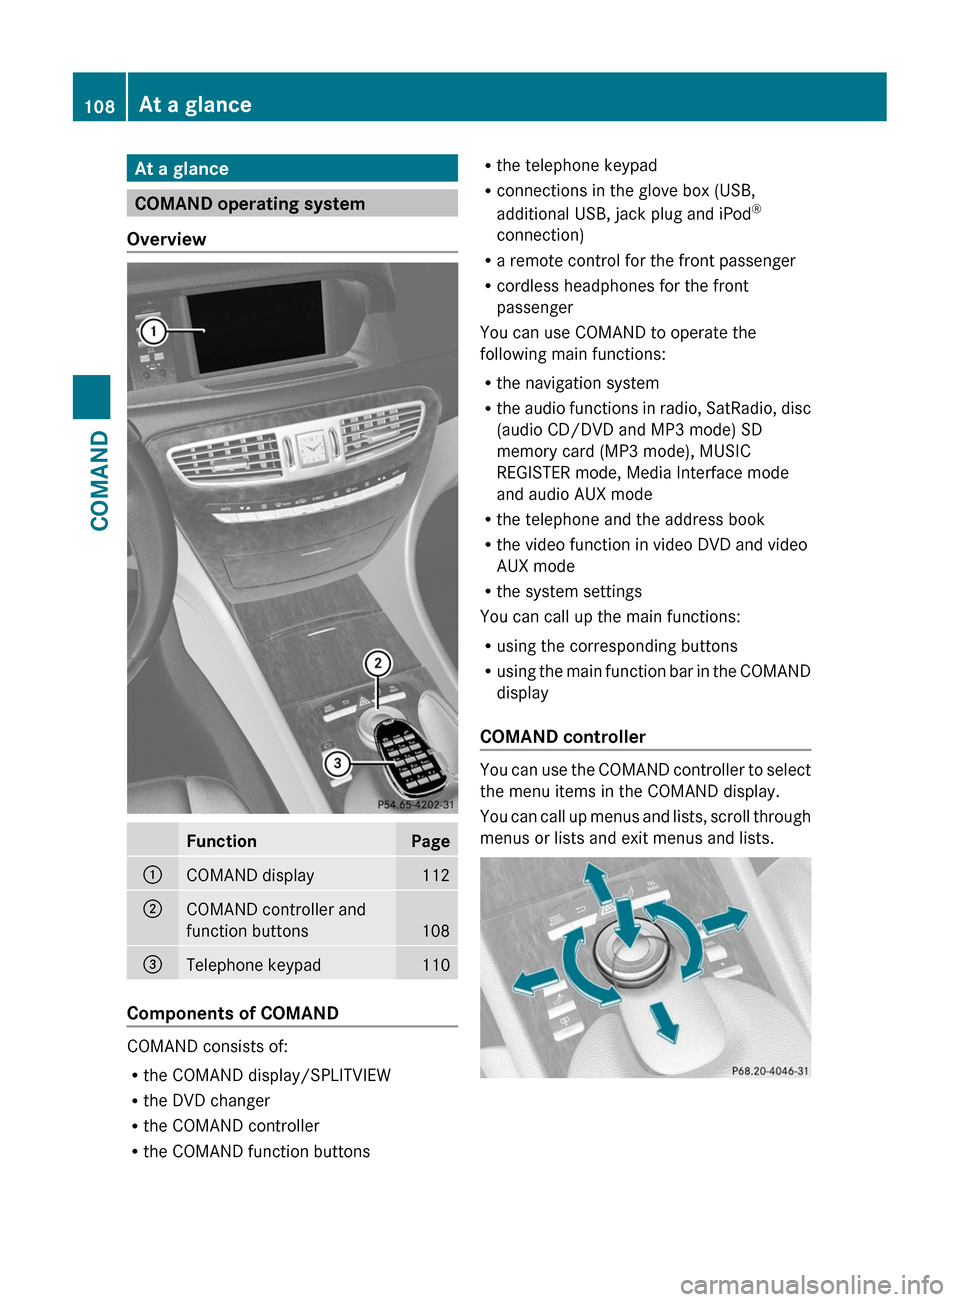 MERCEDES-BENZ CL-Class 2011 C216 Owners Guide At a glance
COMAND operating system
Overview
FunctionPage:COMAND display112;COMAND controller and
function buttons108
=Telephone keypad110
Components of COMAND
COMAND consists of:
Rthe COMAND display/